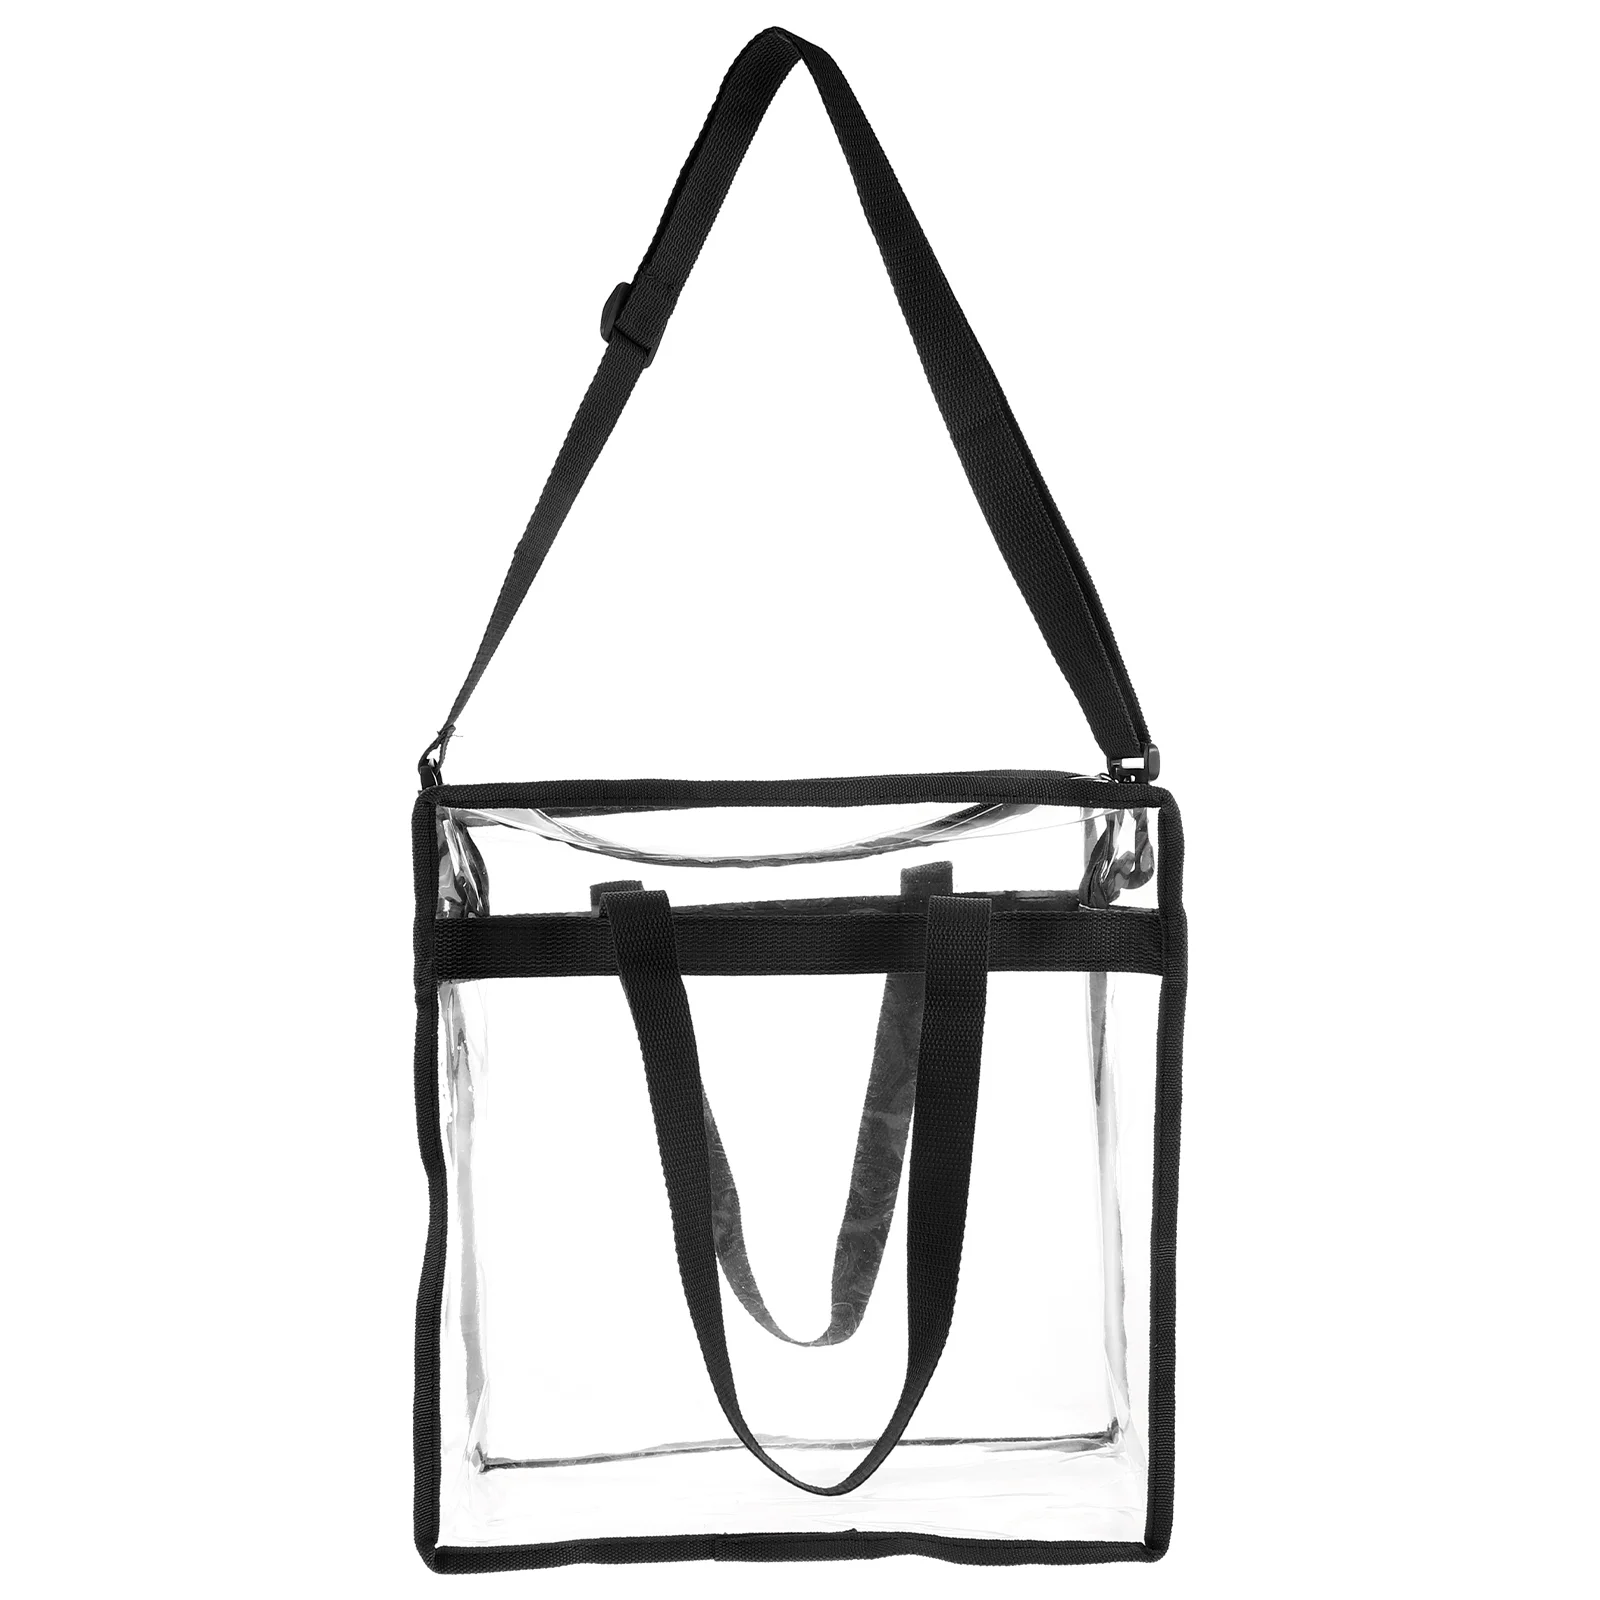 Shopping Bag Bouquet Gift Stadium Approved Purse Tote Women Travel Clear Wrap PVC Crossbody Bags Leisure